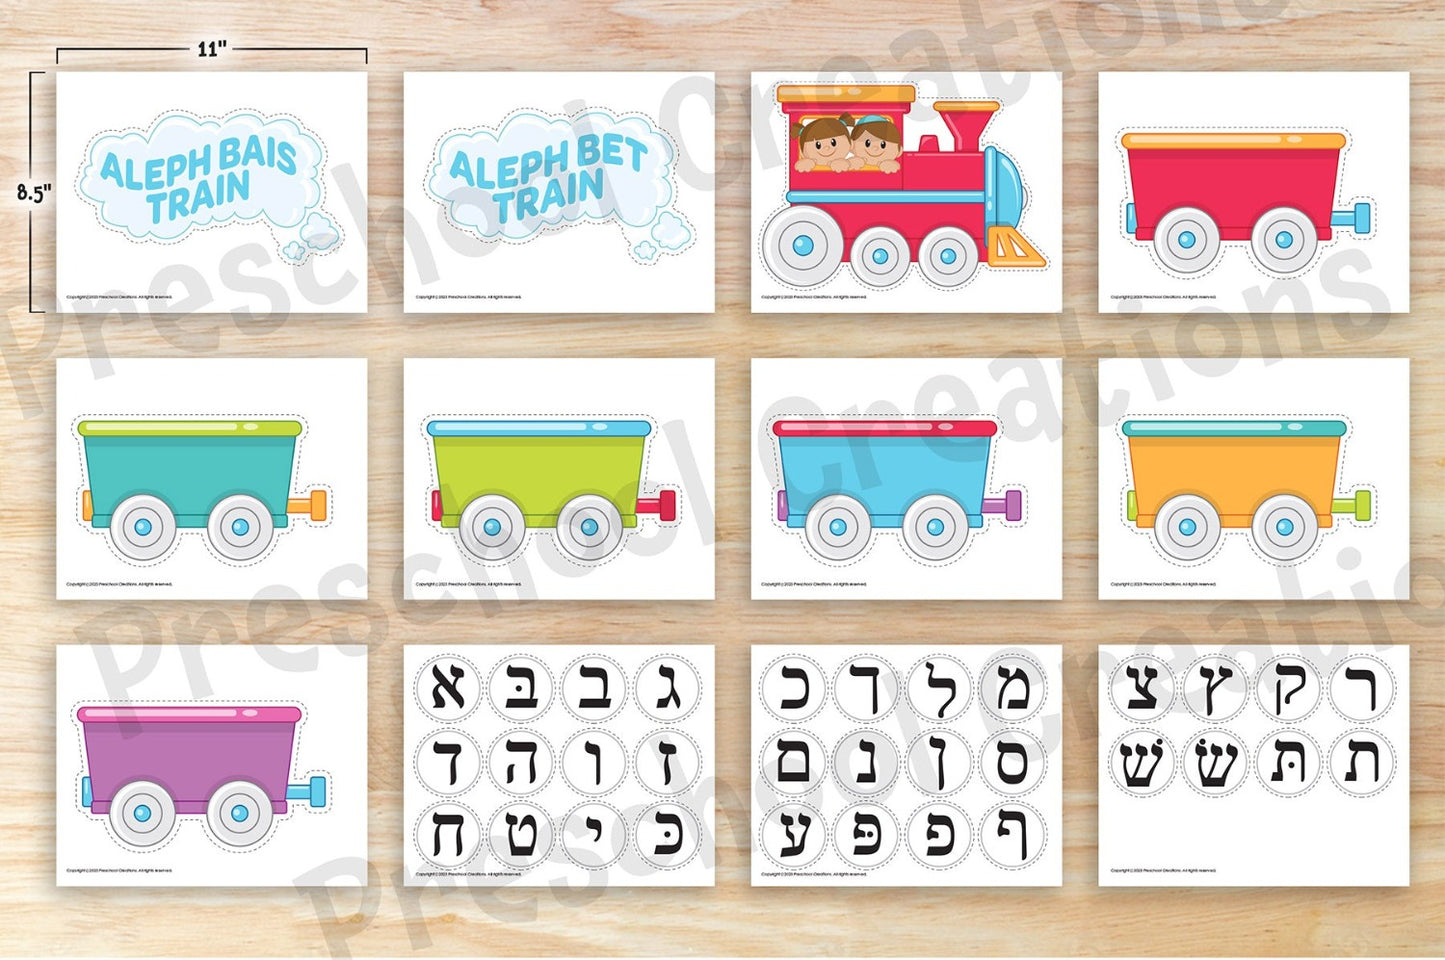 12 pages including a Train engine, 6 train cars, 2 word bubble options and 3 pages of Hebrew Alef bet  Discover the Aleph Beis train - a colorful and fun way to learn the Hebrew Aleph Bet!  With 6 vibrant train cars and an easy design, this adorable train is perfect for both at-home or in-classroom learning. Make learning the aleph bais a fun and exciting experience for both you and your kids!  Includes 2 word bubbles featuring different pronunciations: Aleph bet train and Aleph Bais to suit your custom